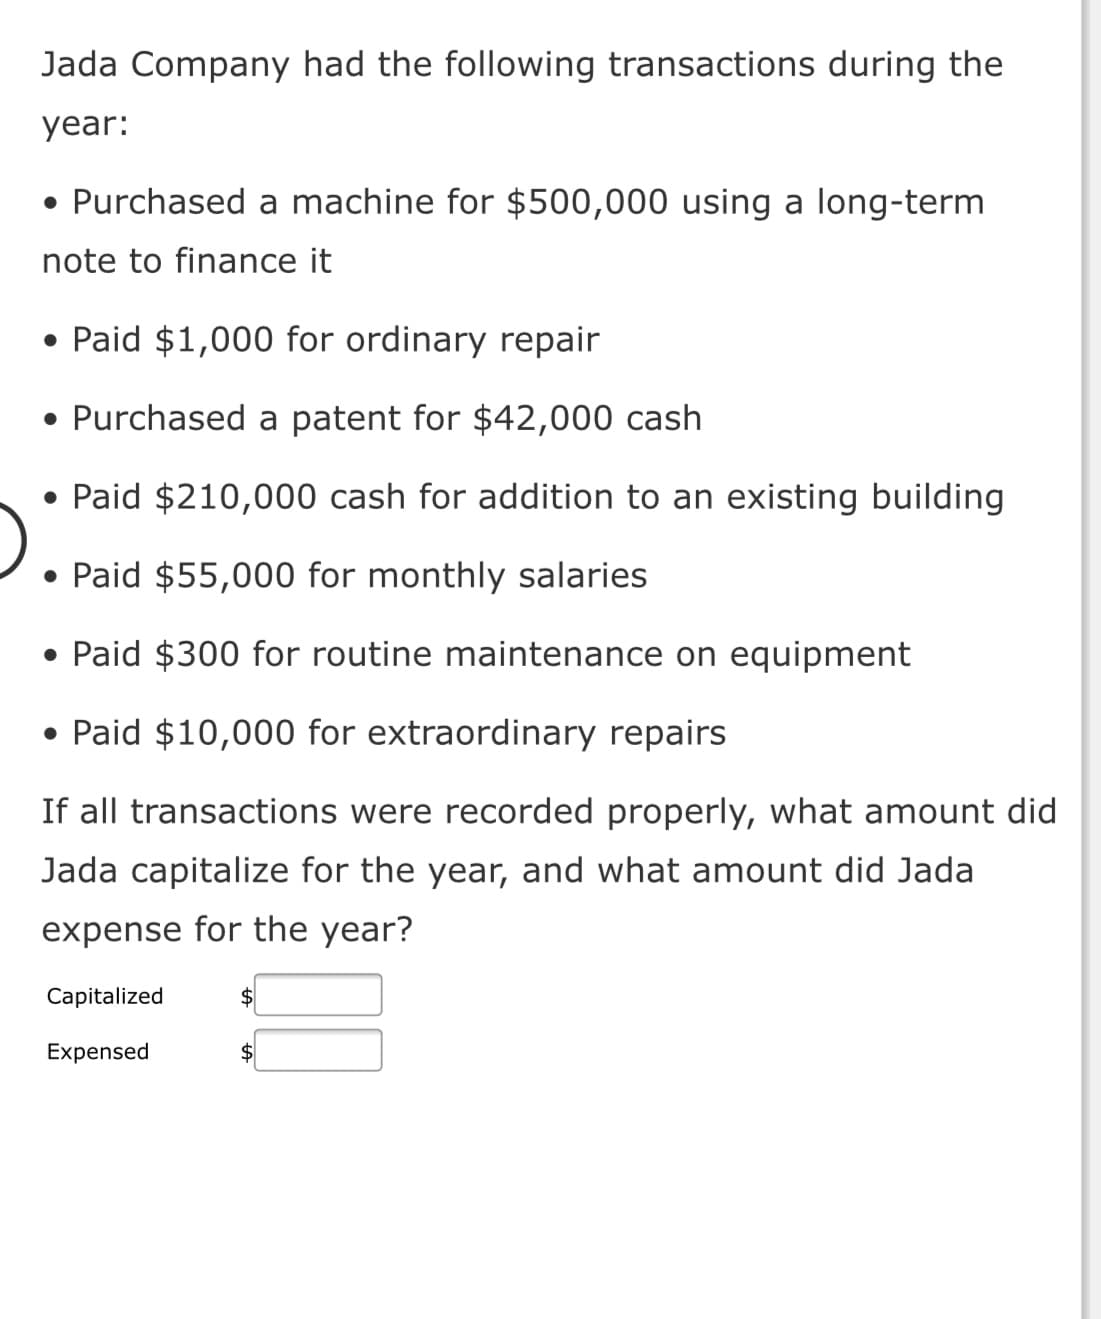 Jada Company had the following transactions during the
year:
• Purchased a machine for $500,000 using a long-term
note to finance it
• Paid $1,000 for ordinary repair
• Purchased a patent for $42,000 cash
• Paid $210,000 cash for addition to an existing building
• Paid $55,000 for monthly salaries
• Paid $300 for routine maintenance on equipment
• Paid $10,000 for extraordinary repairs
If all transactions were recorded properly, what amount did
Jada capitalize for the year, and what amount did Jada
expense for the year?
Capitalized
$4
Expensed
